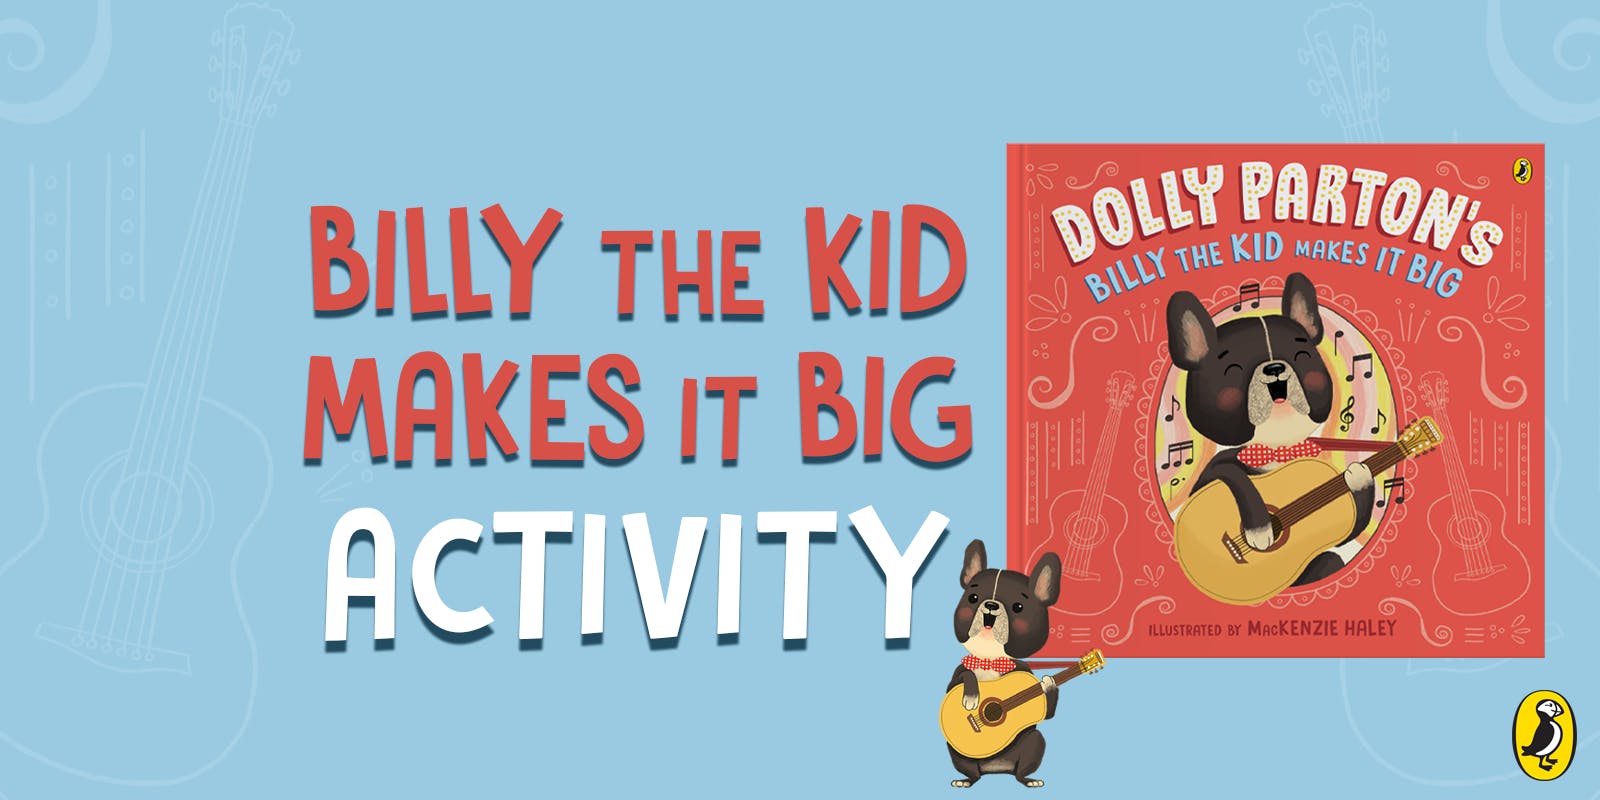 Dolly Parton's Billy the Kid Makes it Big Activity